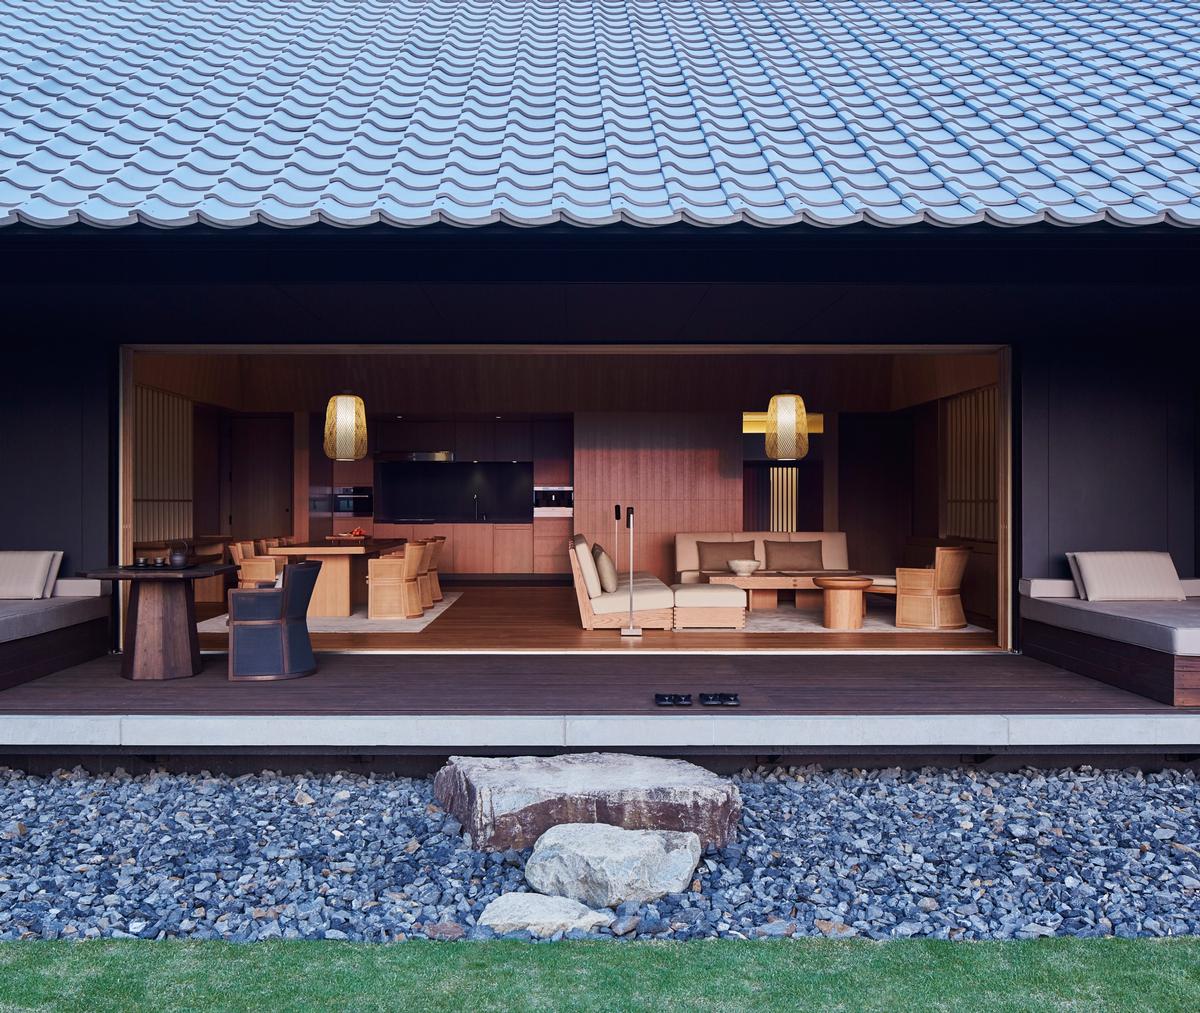 Designed by the same team behind Aman Tokyo, Kerry Hill Architects, the architecture of the resort is based on a contemporary interpretation of Japanese Minka buildings